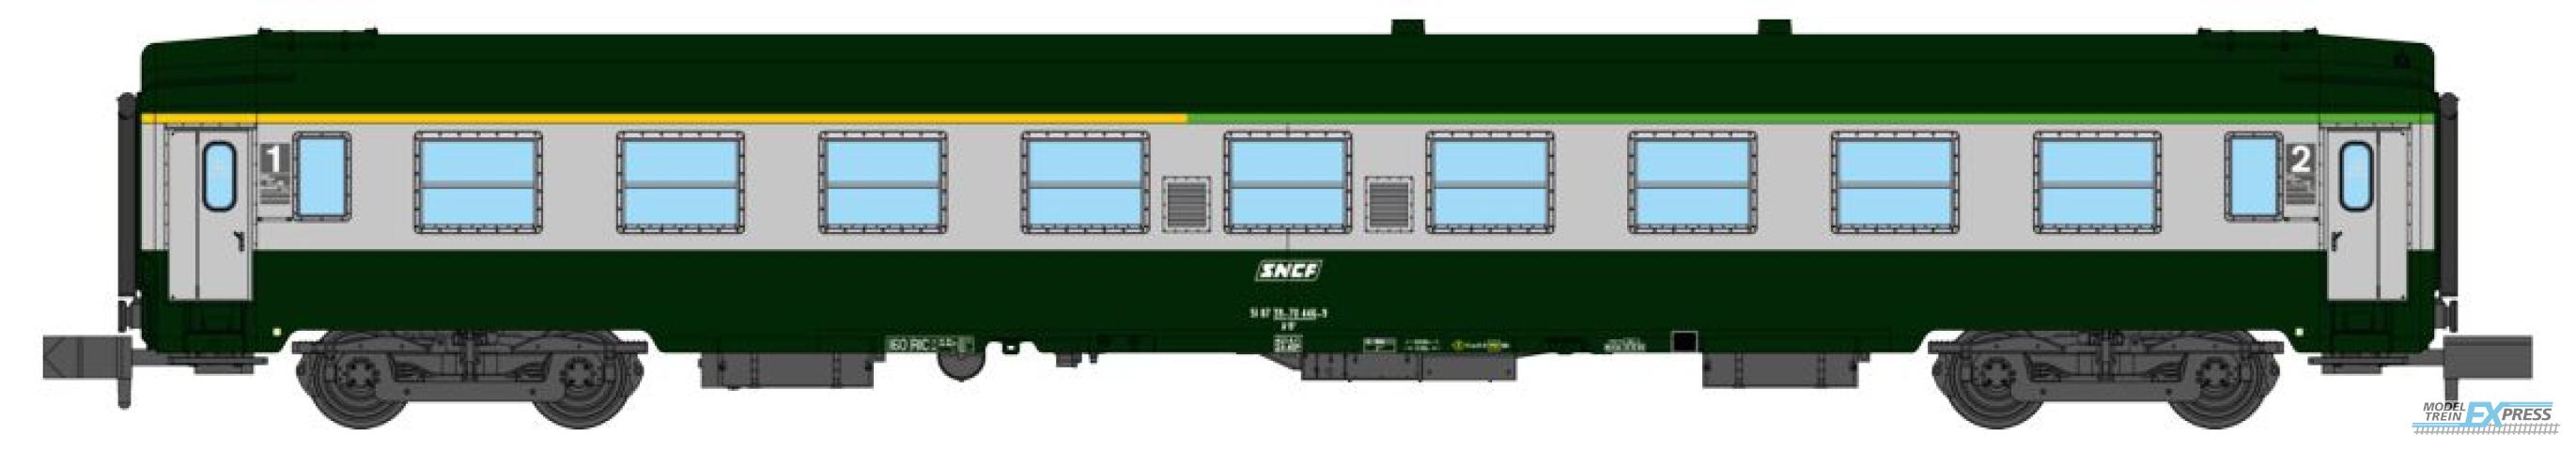 REE models NW-264 UIC Y coach, A4B5 ex-A9 green/concrete grey  livery ,boxed SNCF Logo, Period V